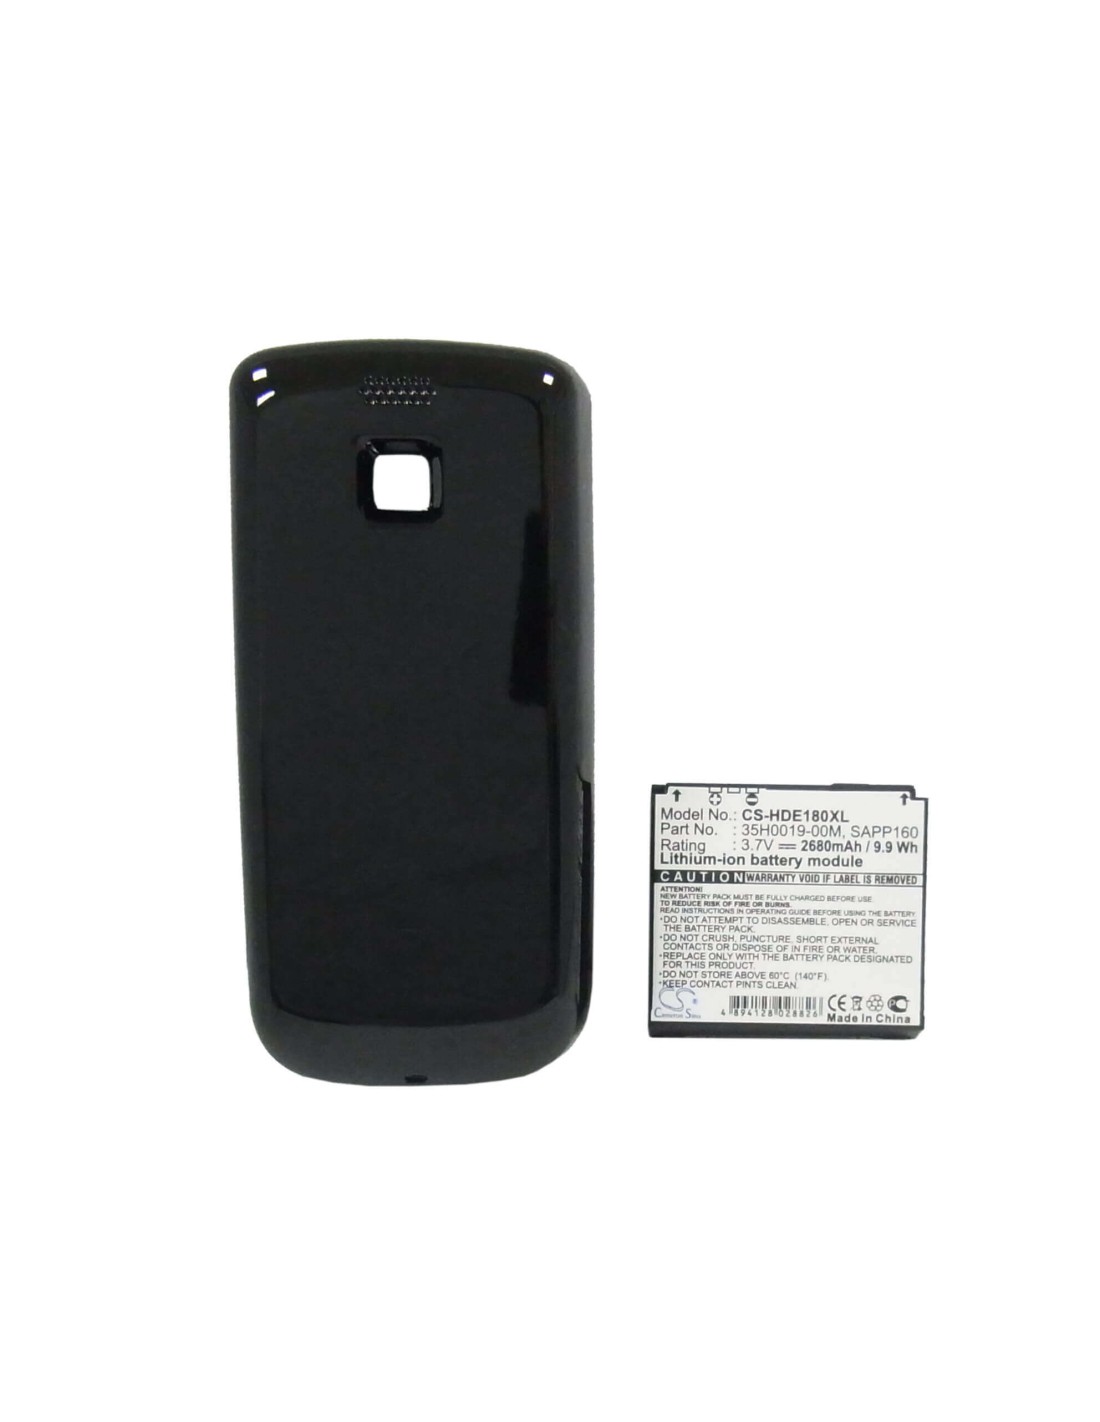 Battery for HTC Magic, A6161, Sapphire, black back cover 3.7V, 2680mAh - 9.92Wh